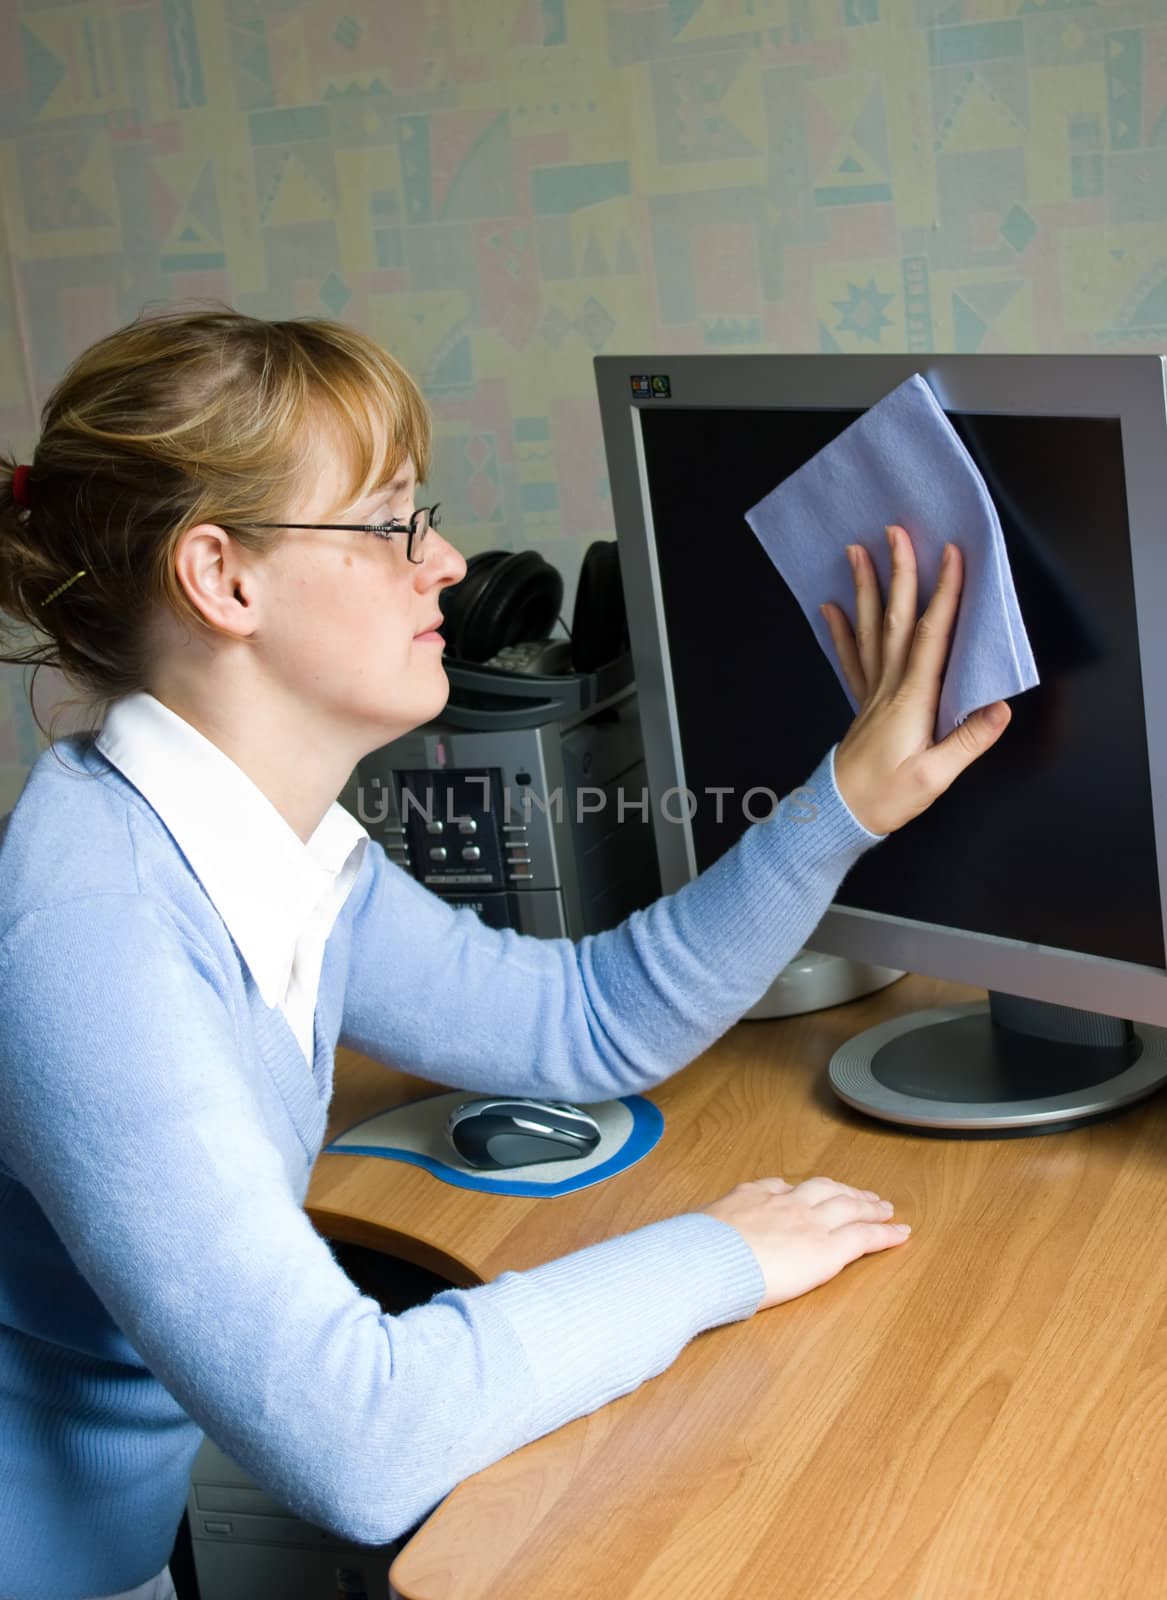 The image of the girl wiping the monitor